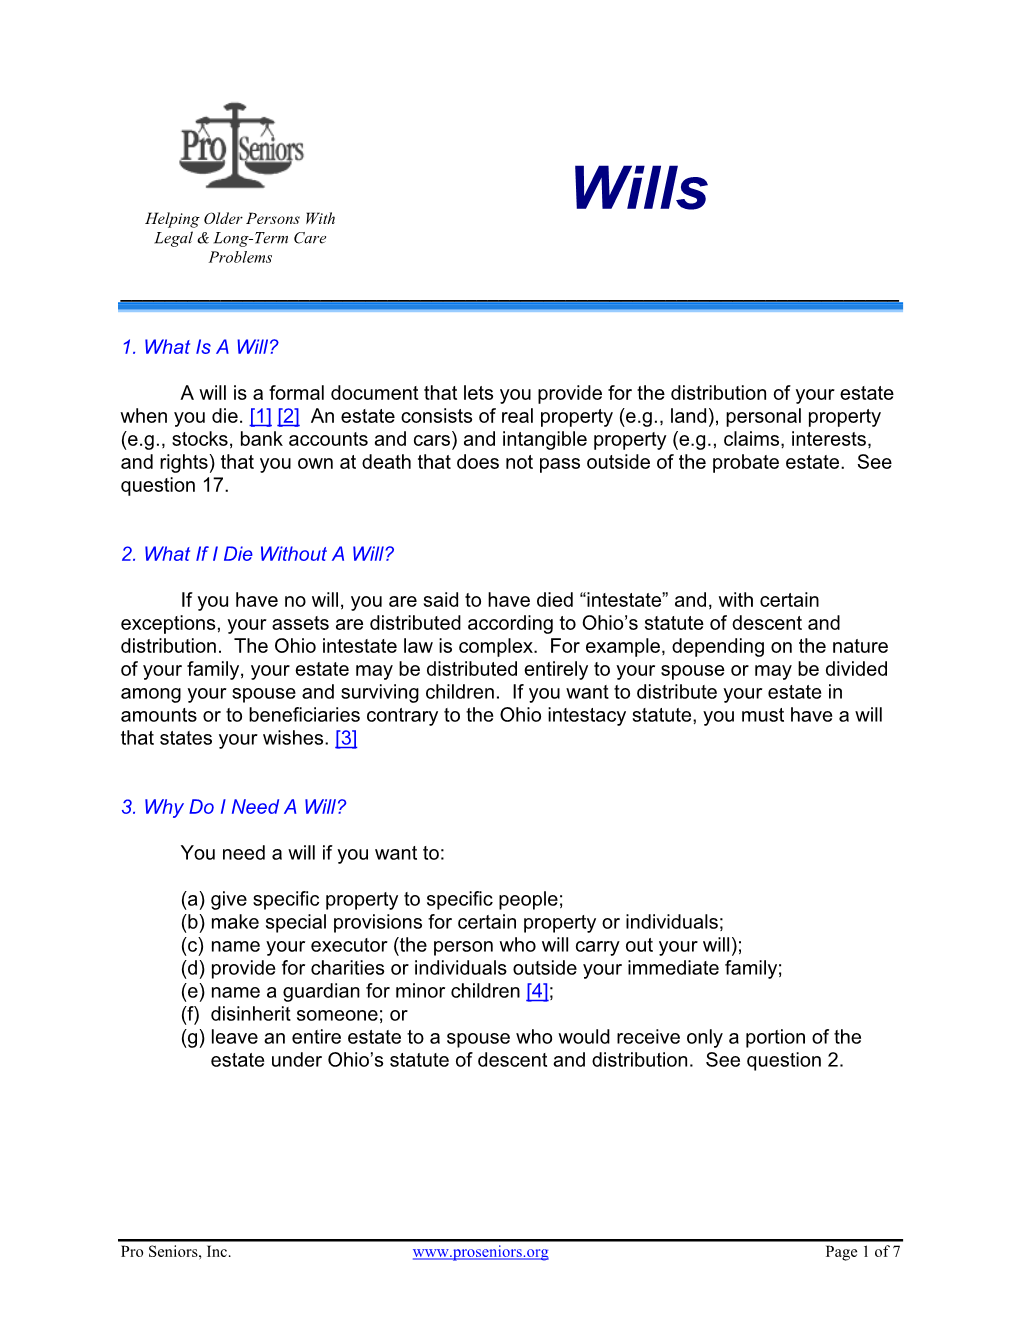 Wills Helping Older Persons with Legal & Long-Term Care Problems